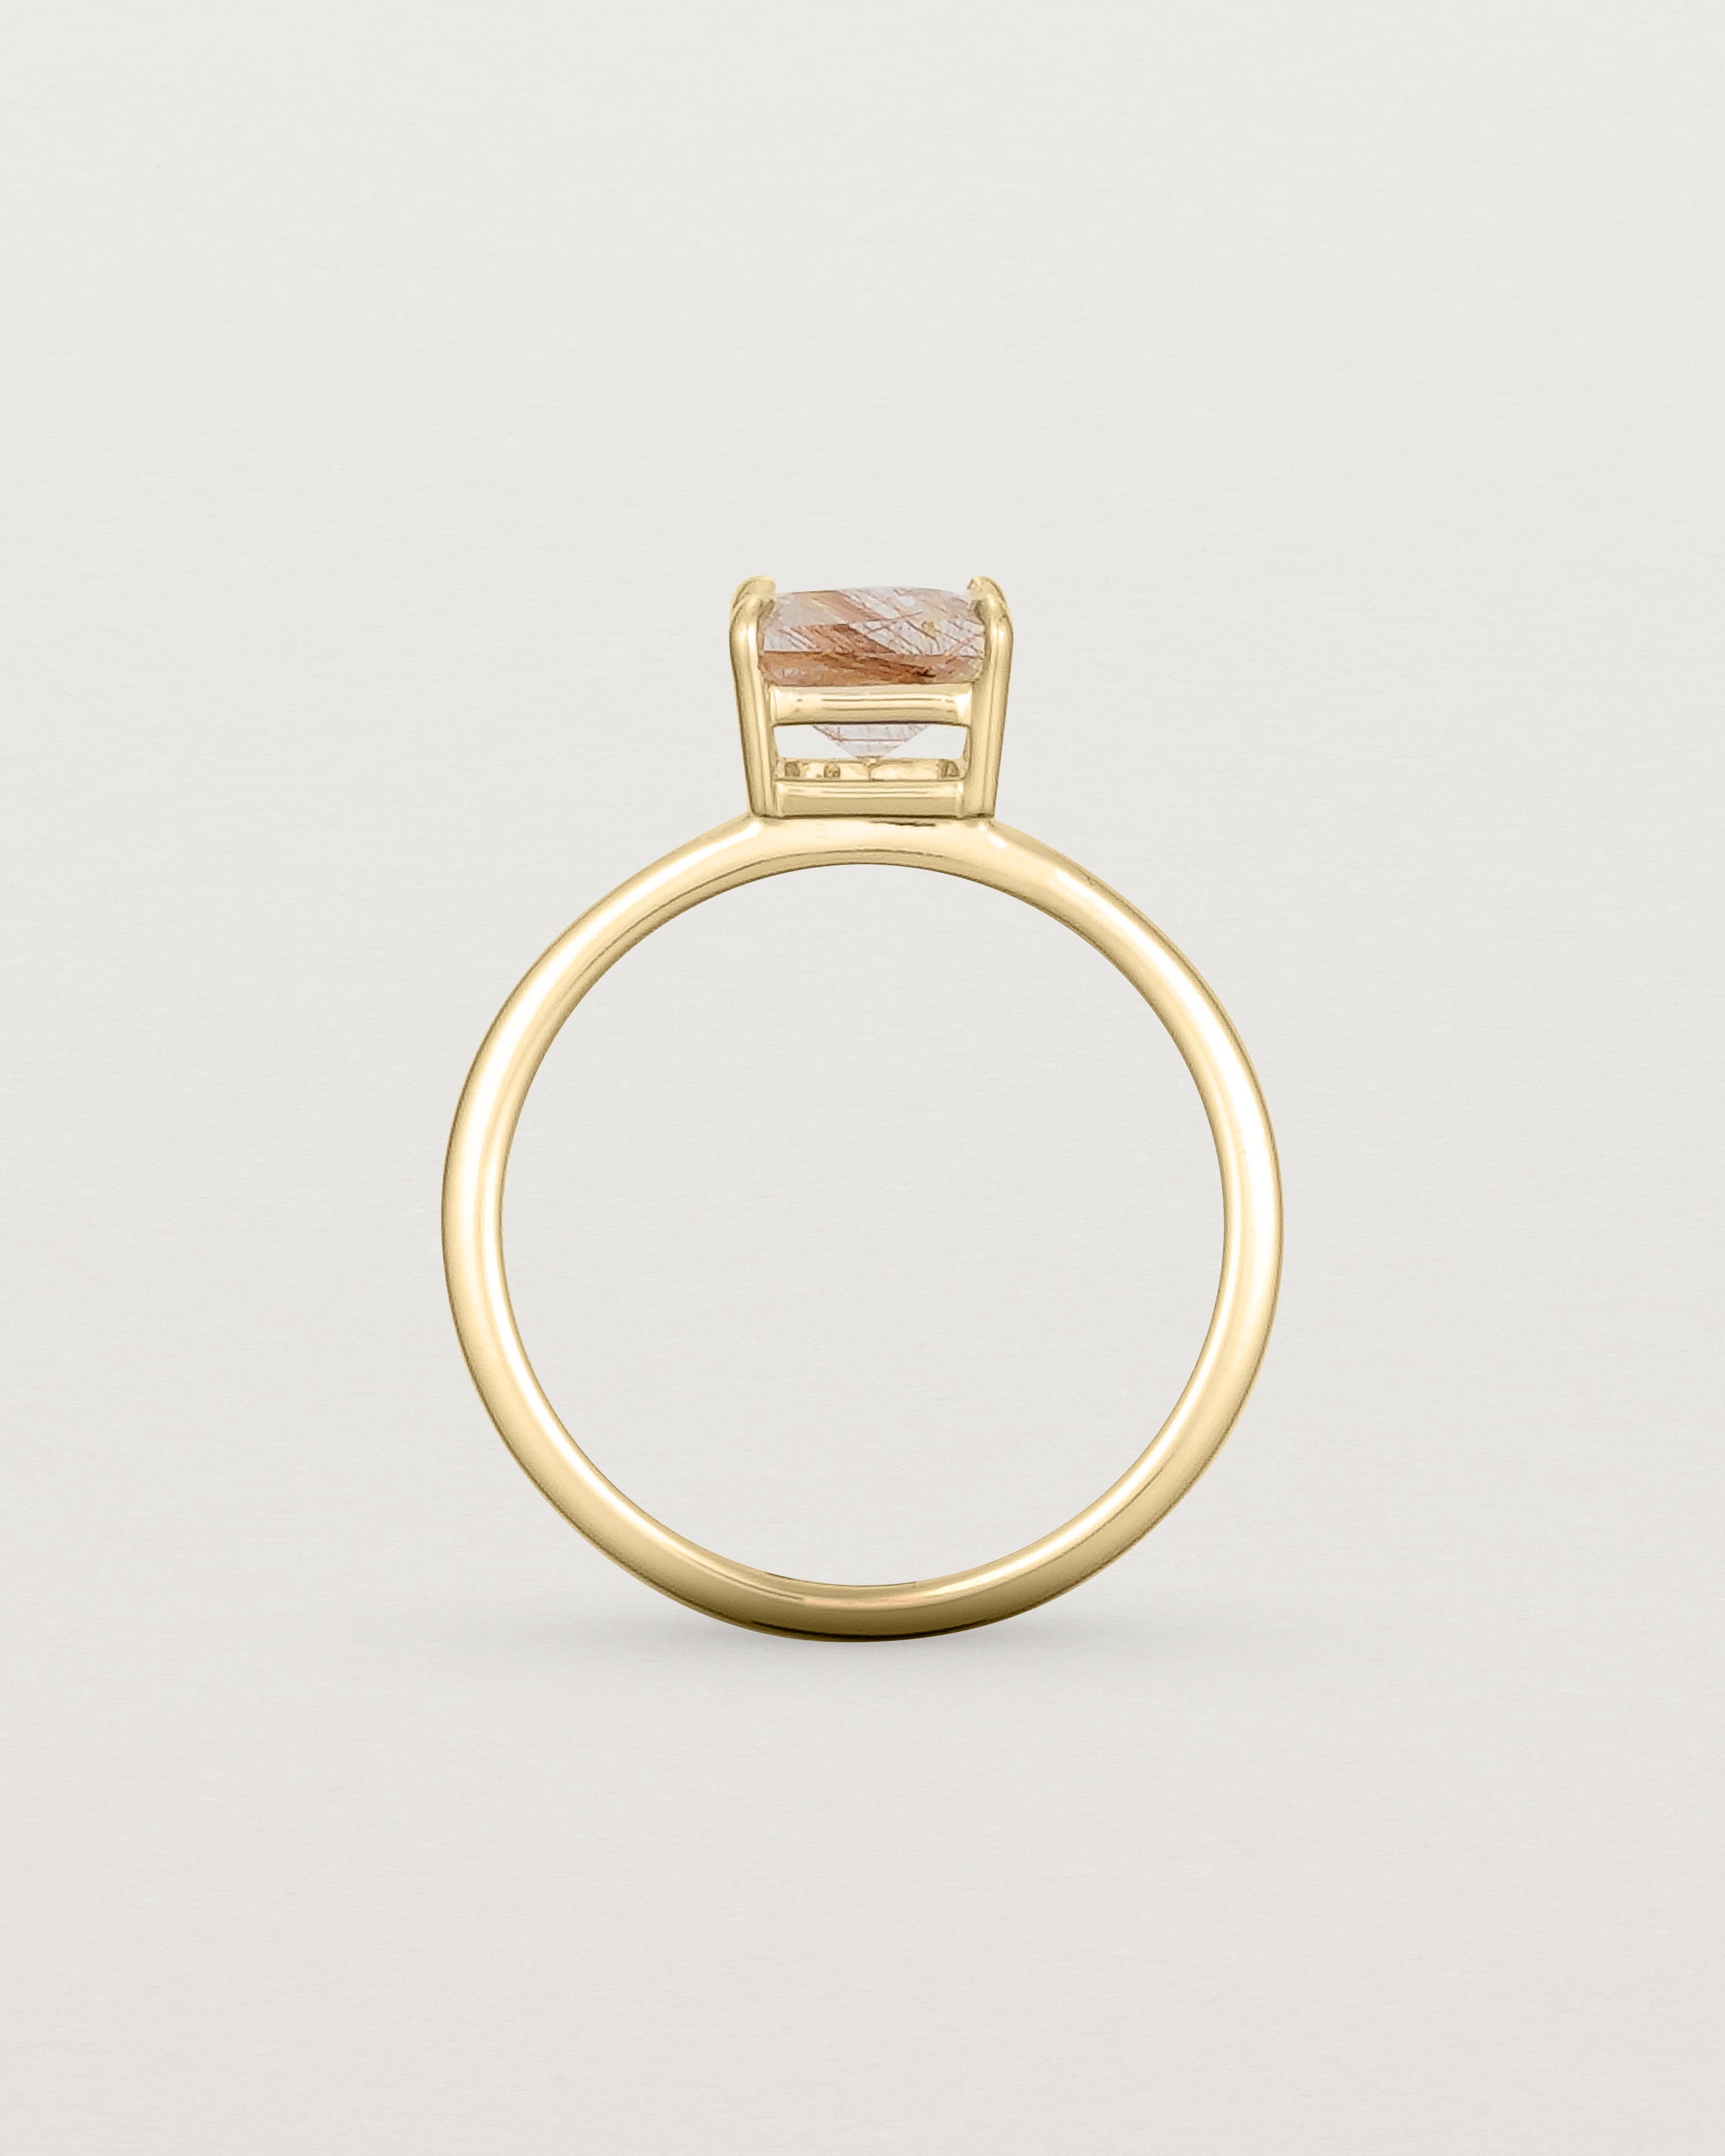 Standing view of the Una Emerald Solitaire | Rutilated Quartz | Yellow Gold.